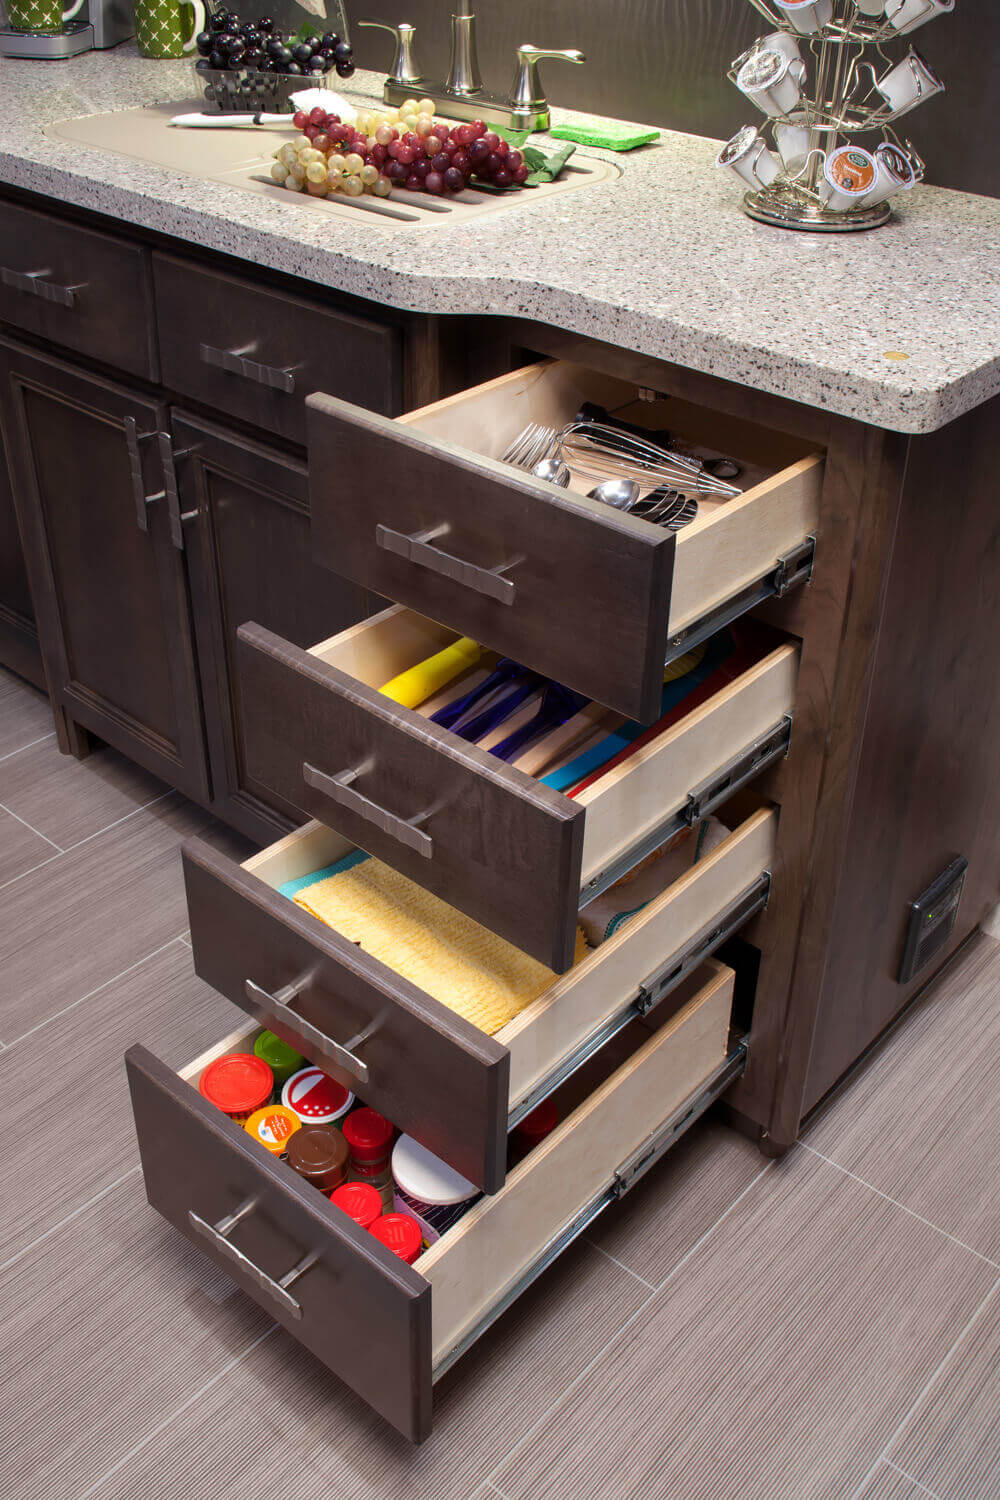 Full Extend Drawers